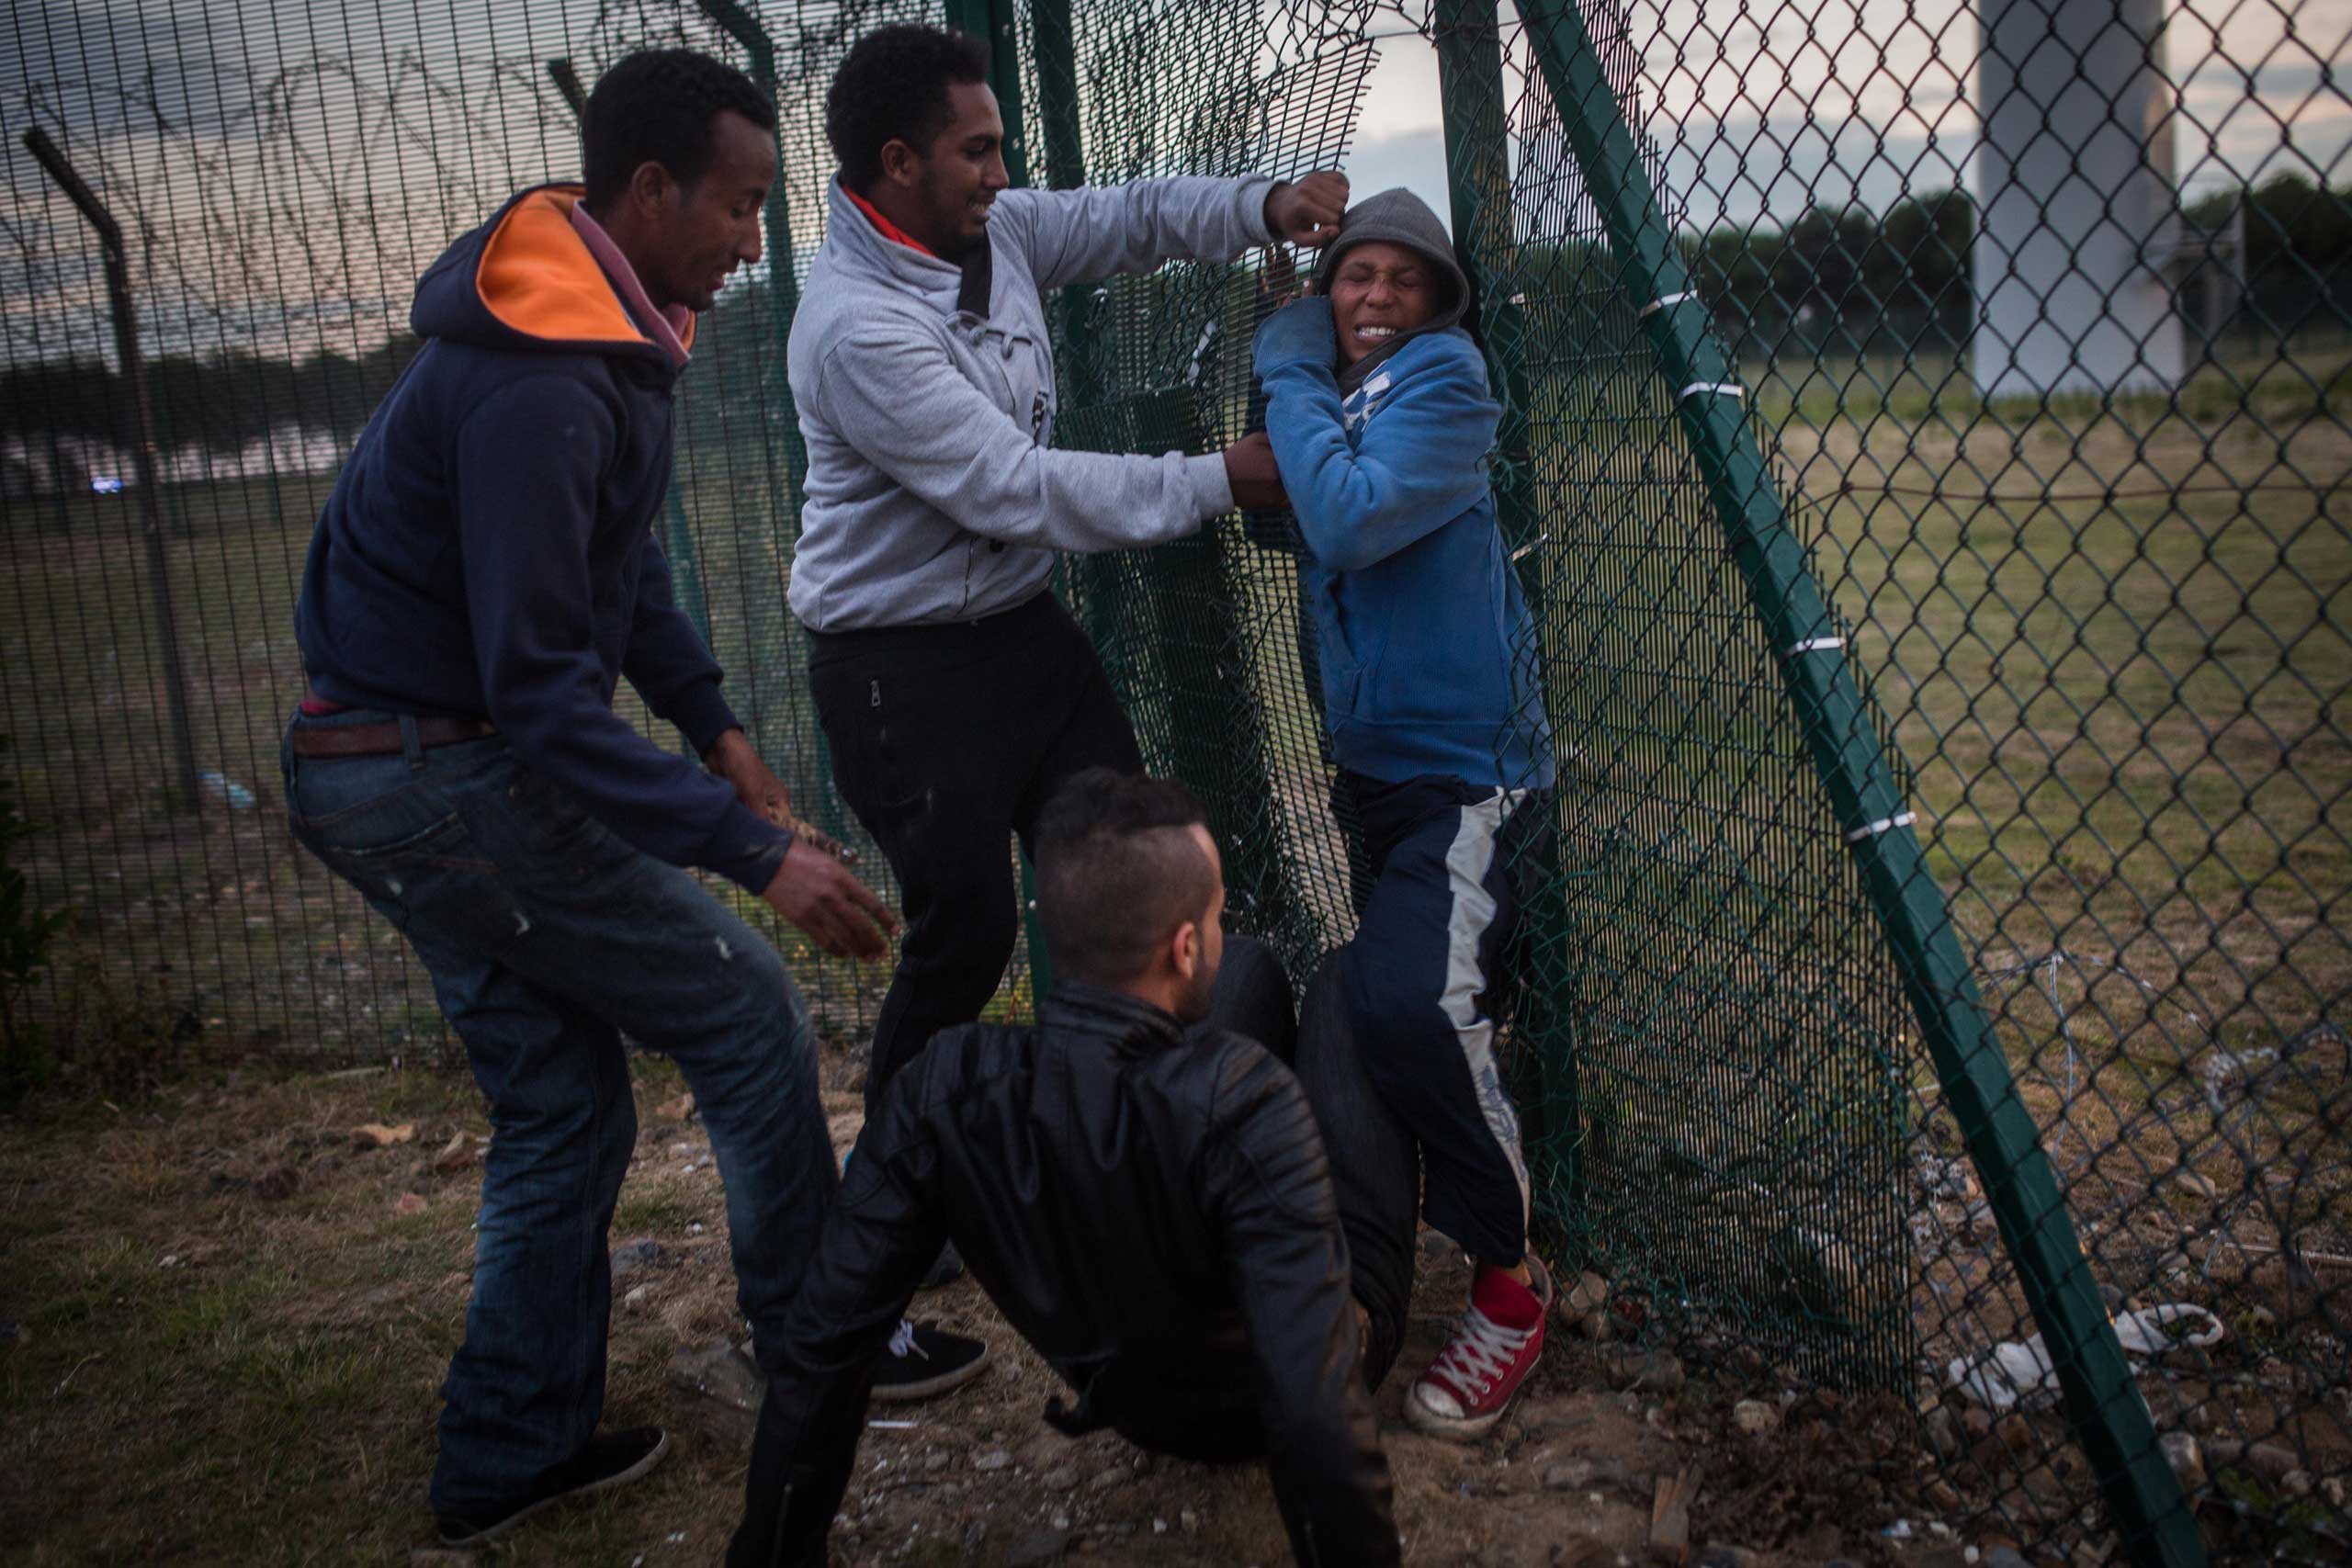 People help a young man squeeze through a gap in a fence near the Eurotunnel terminal in Coquelles in Calais, France, on July 30, 2015. (Rob Stothard—Getty Images)